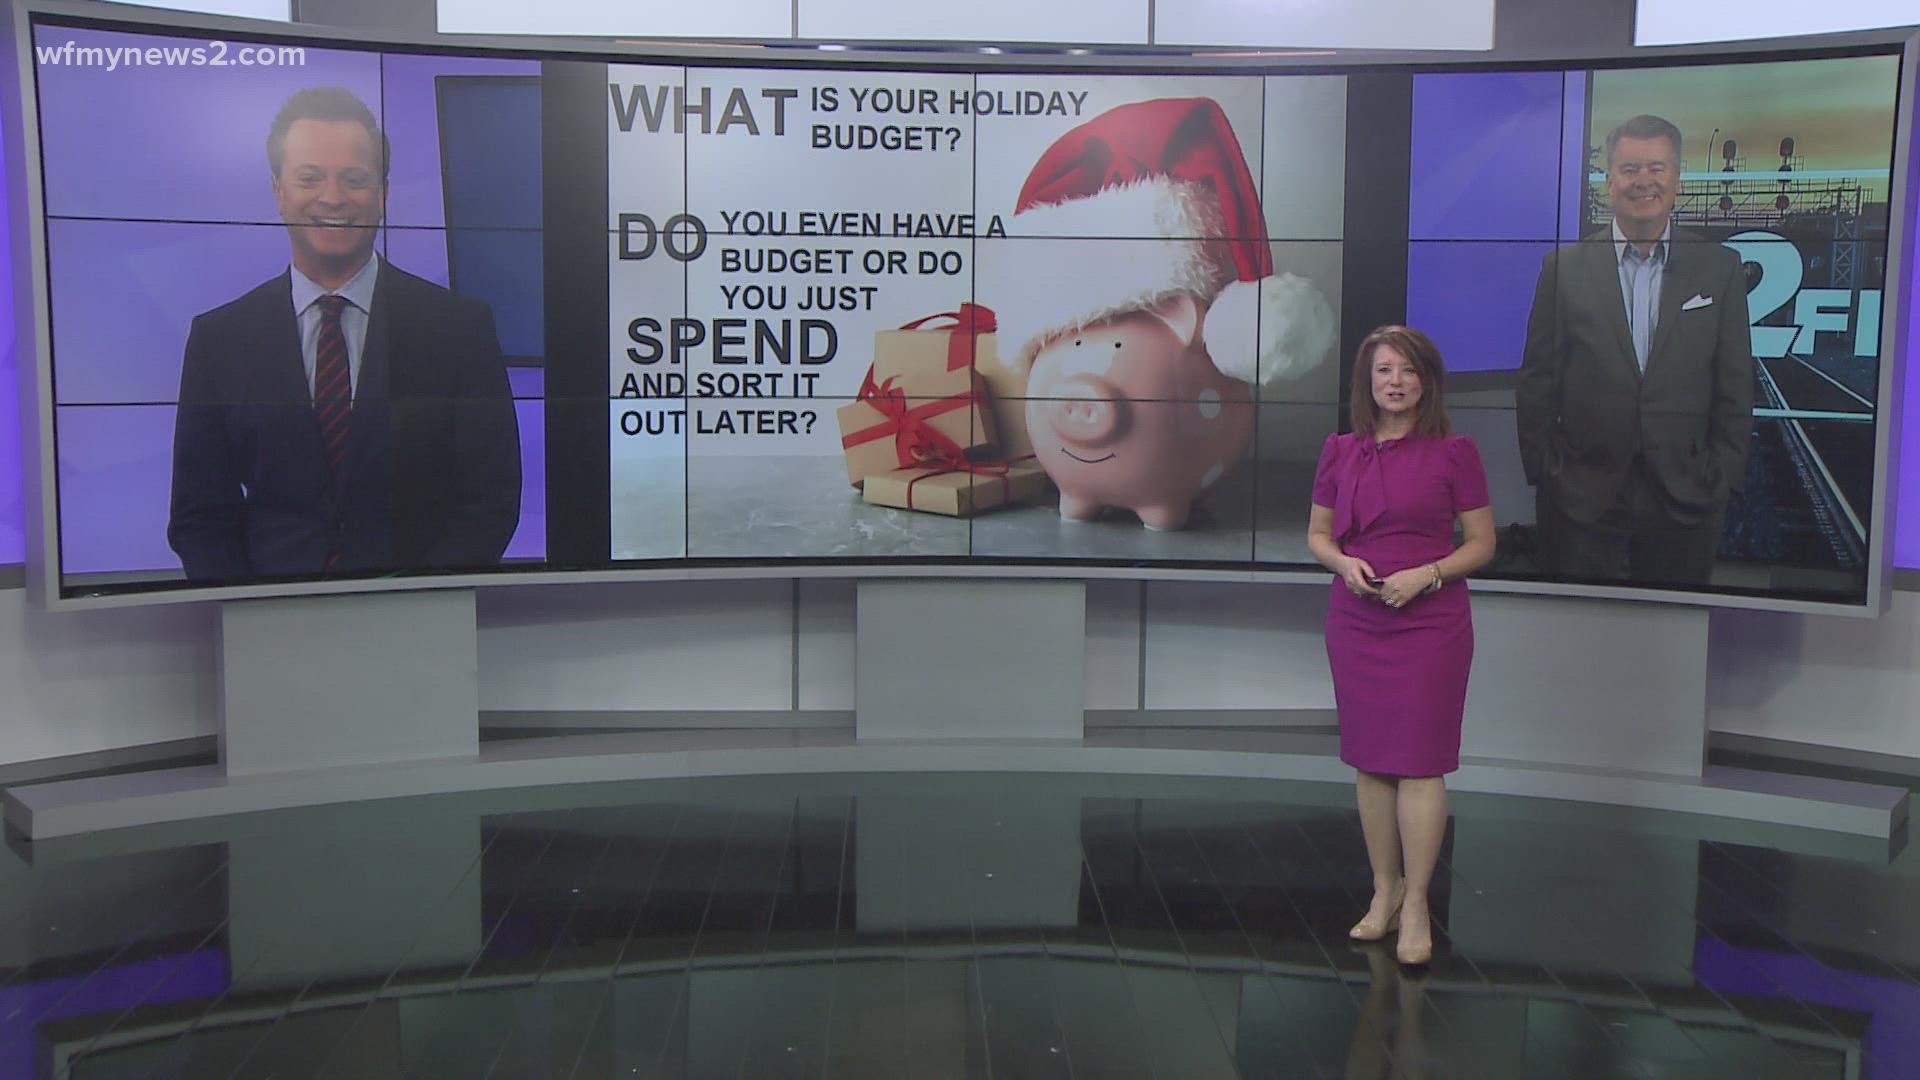 WalletHub experts say the easiest way to avoid overspending is to put holiday money on a prepaid Visa card.